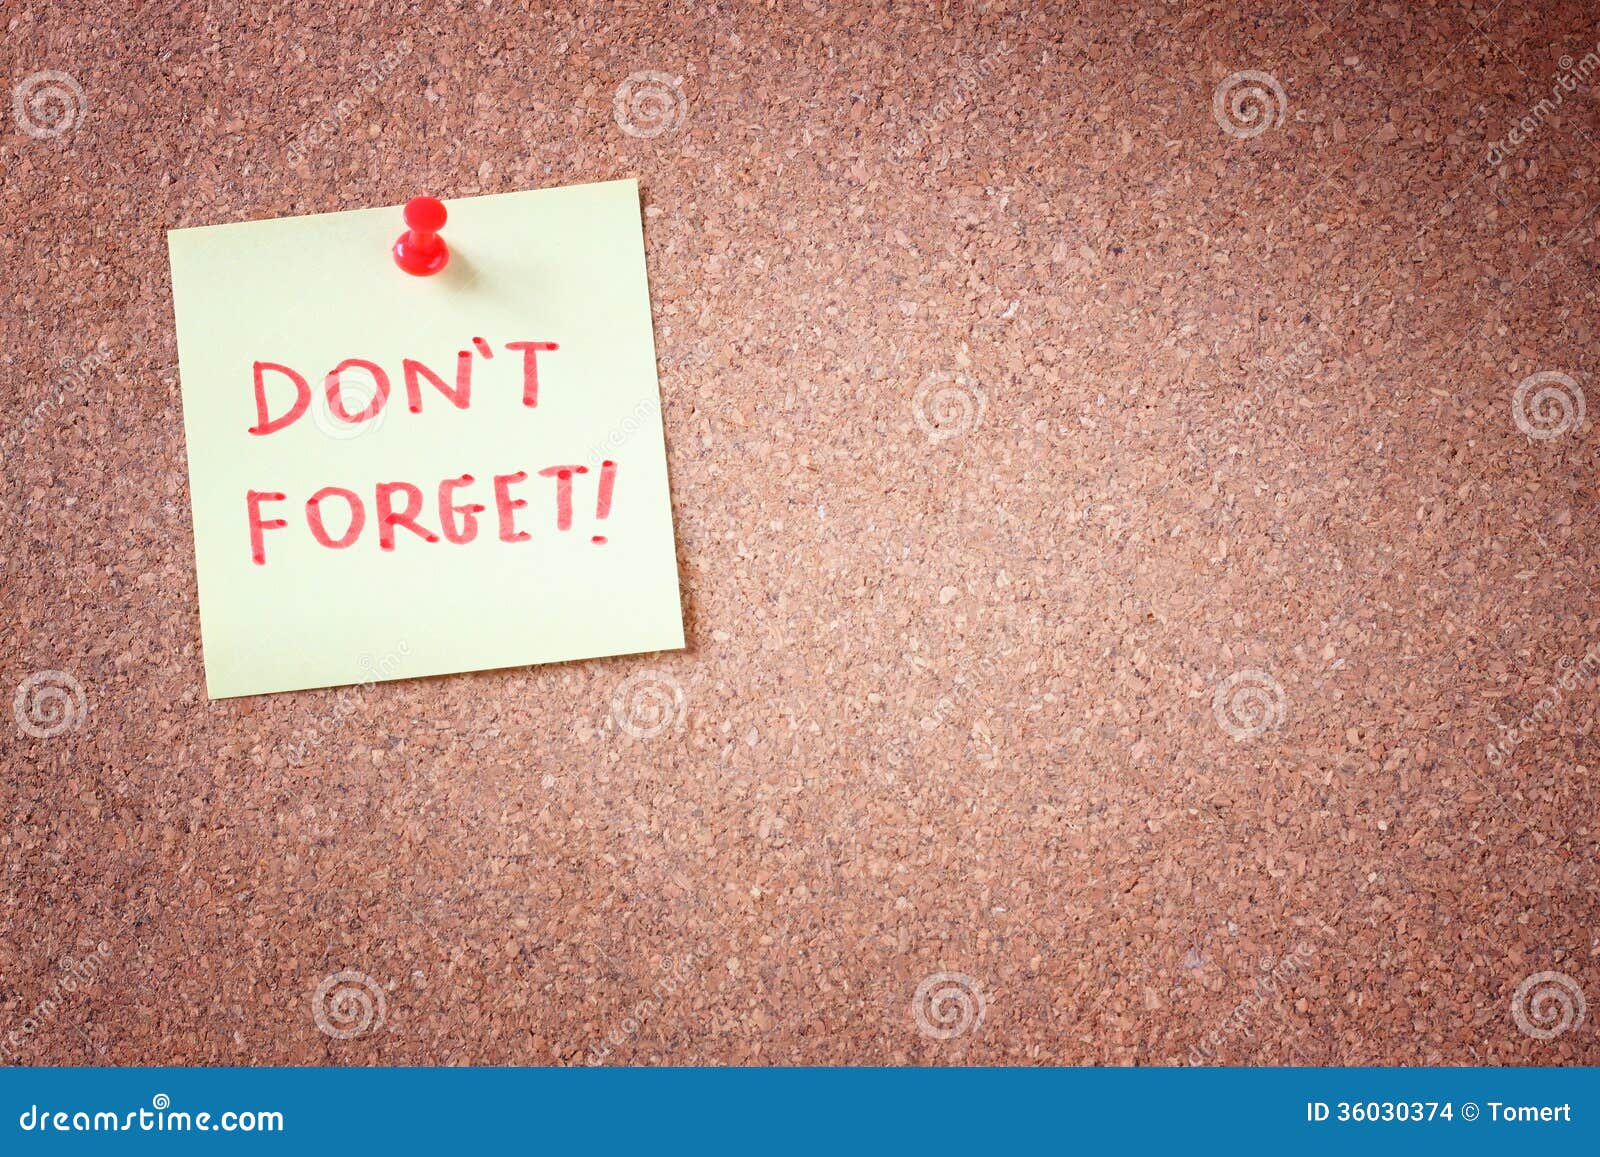 dont forget or do not forget reminder, written on yellow sticker on cork bulletin or message board.